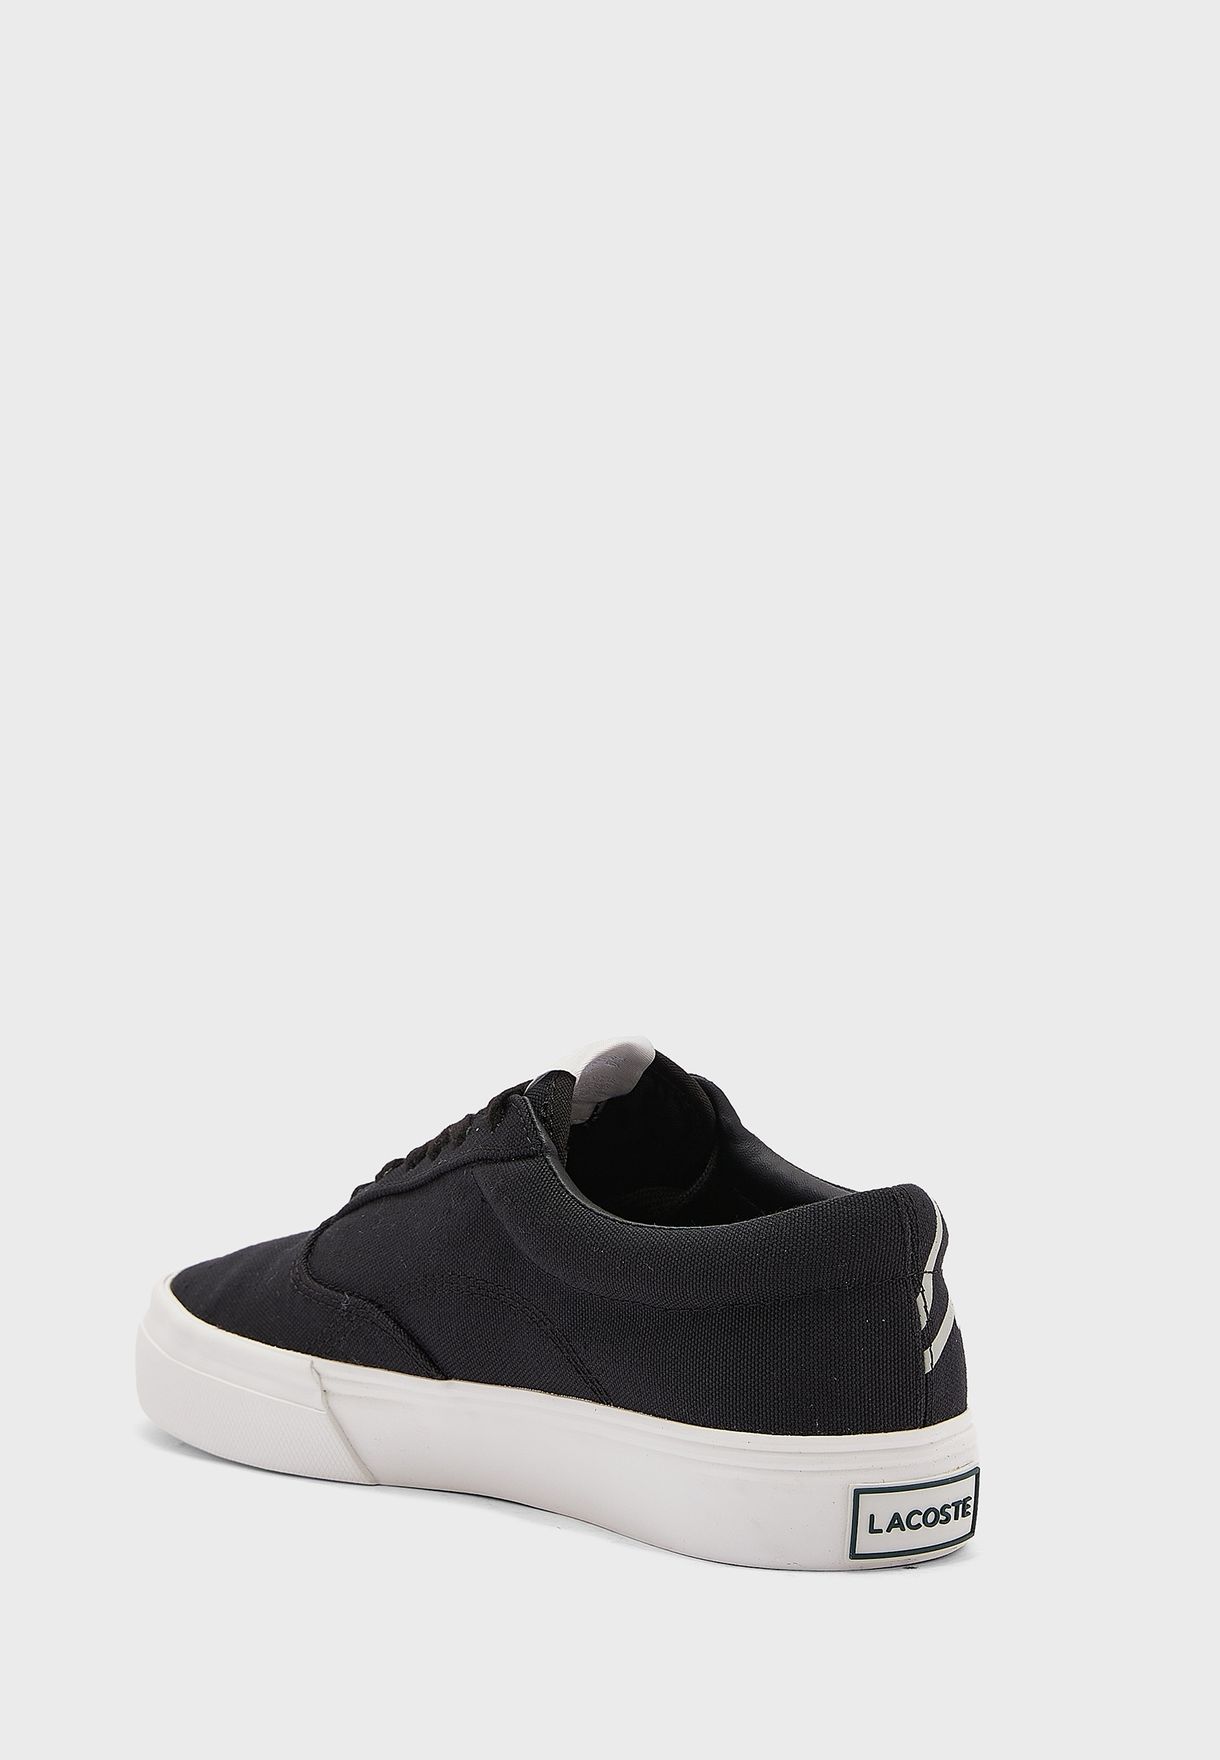 Jump Serve Lace01211 Sneakers